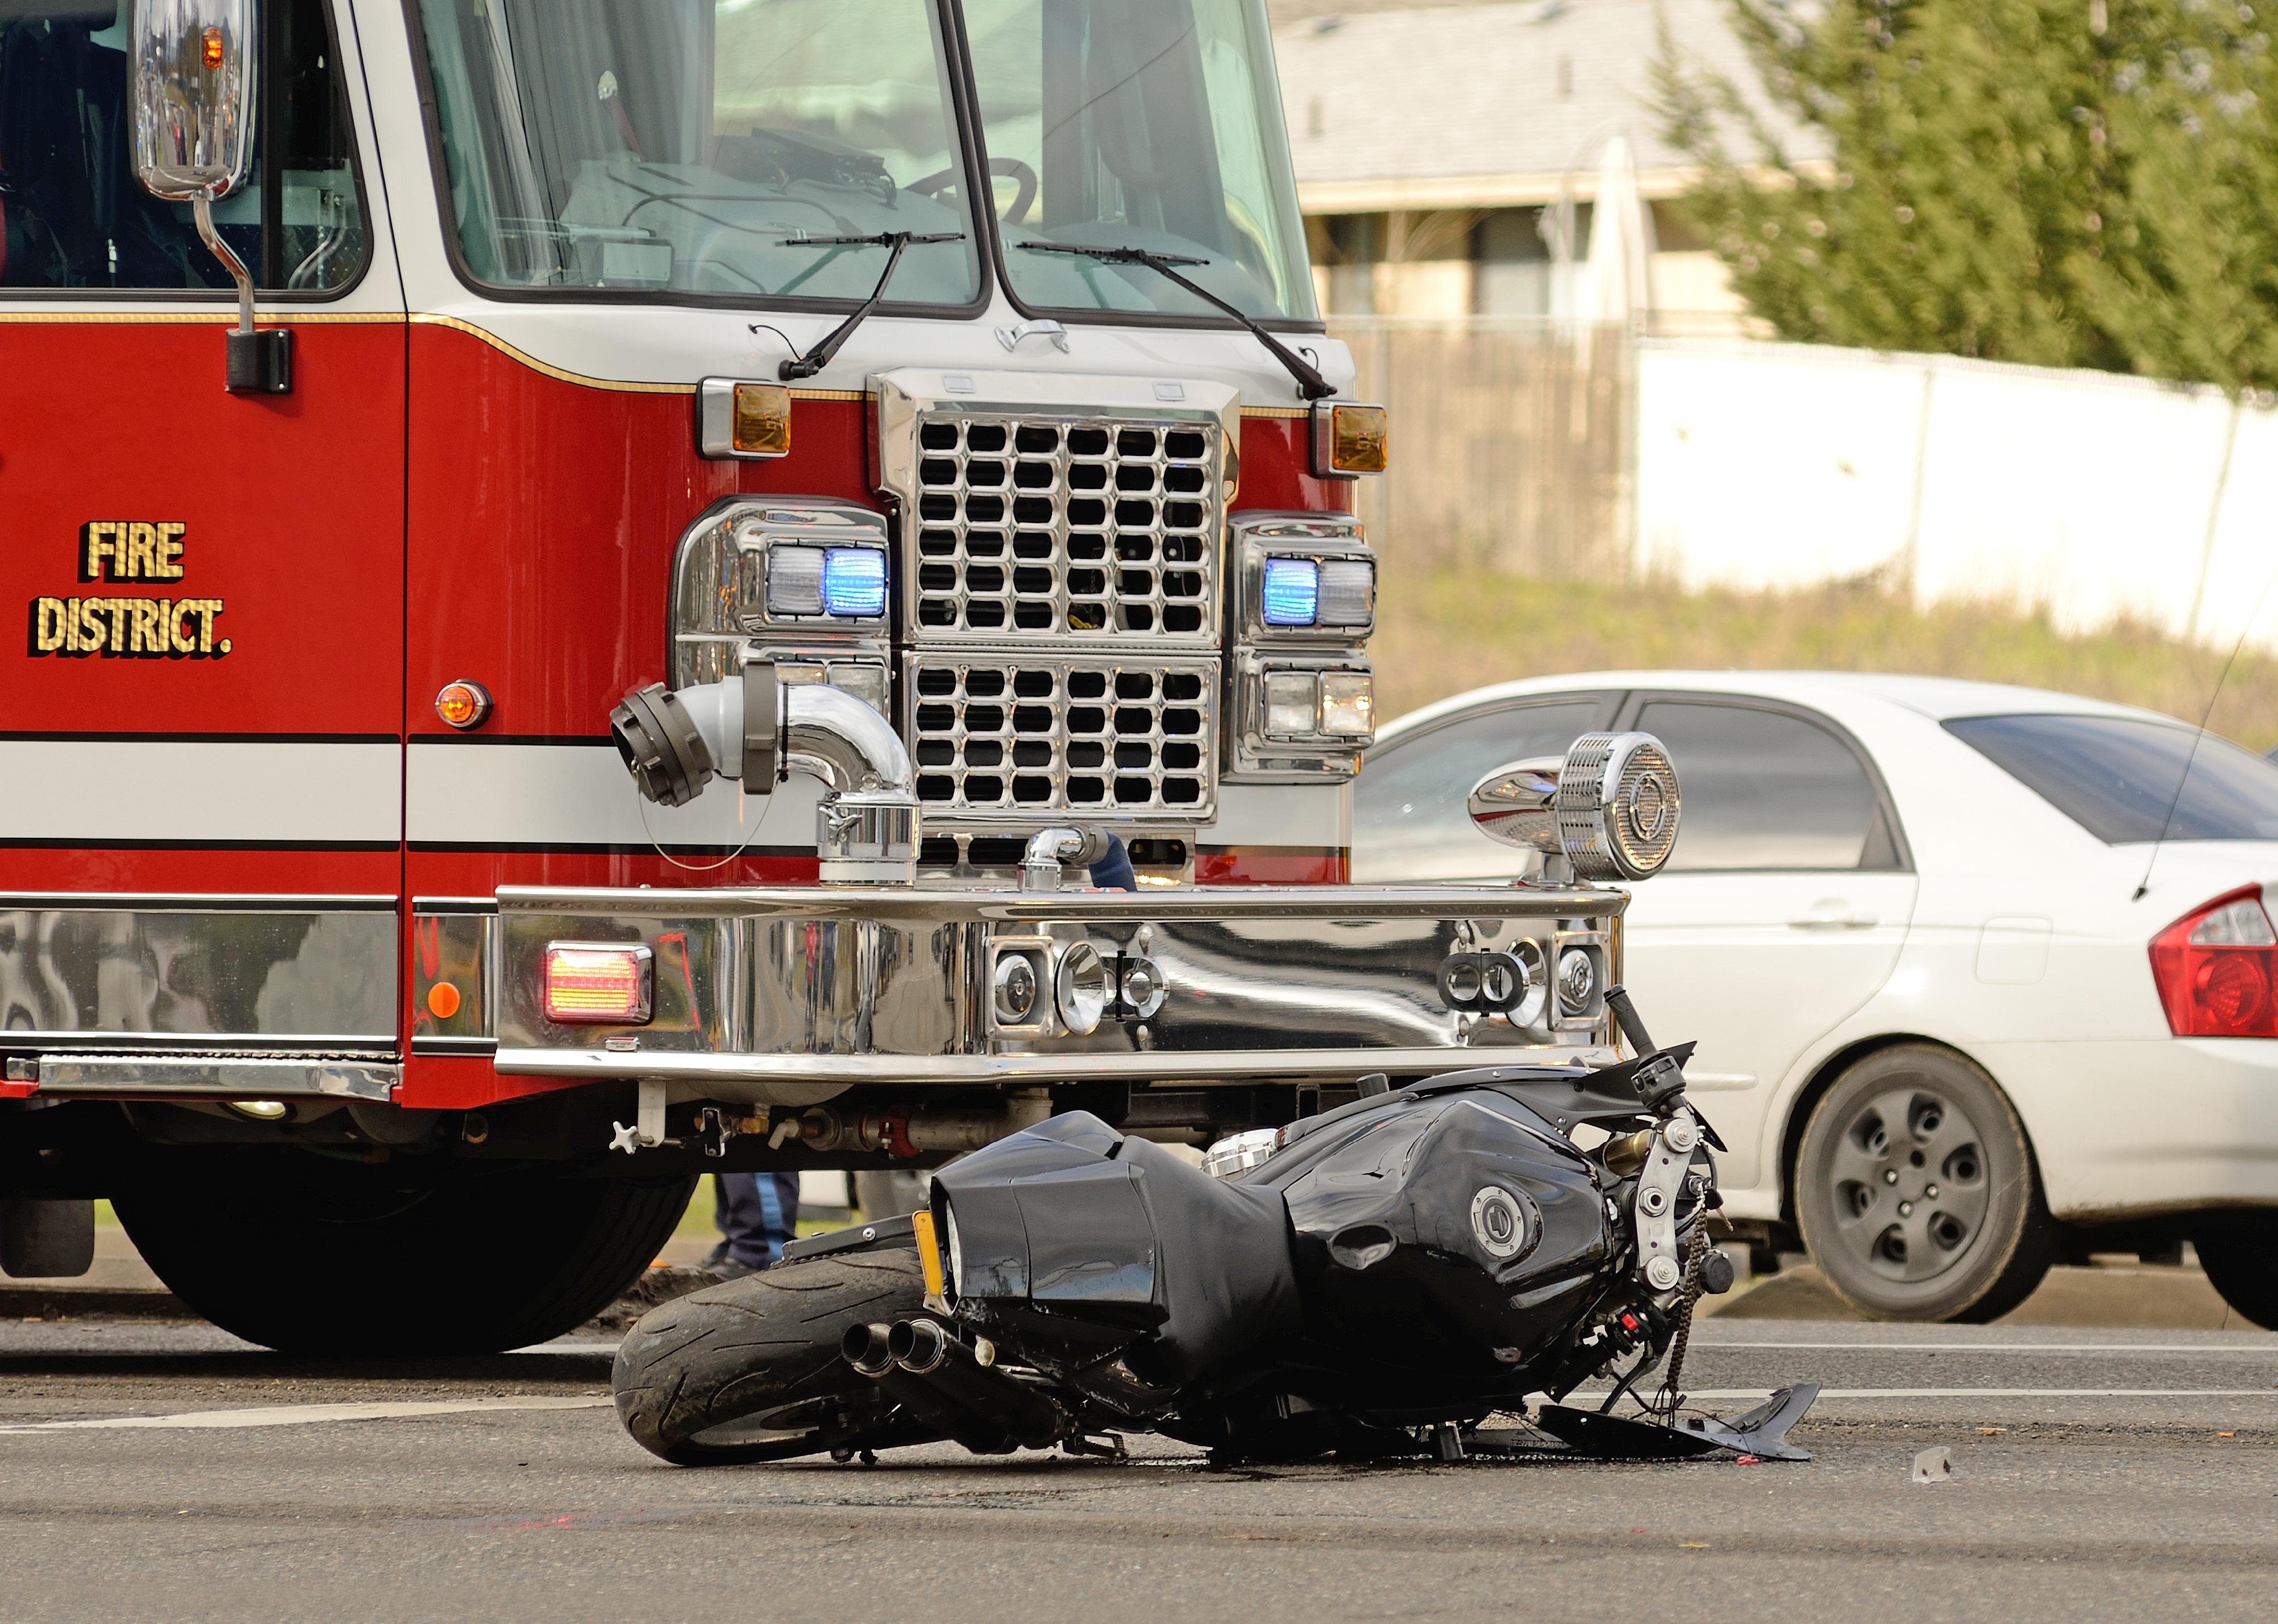 Emergency responders at the scene of a motorcycle and car accident.